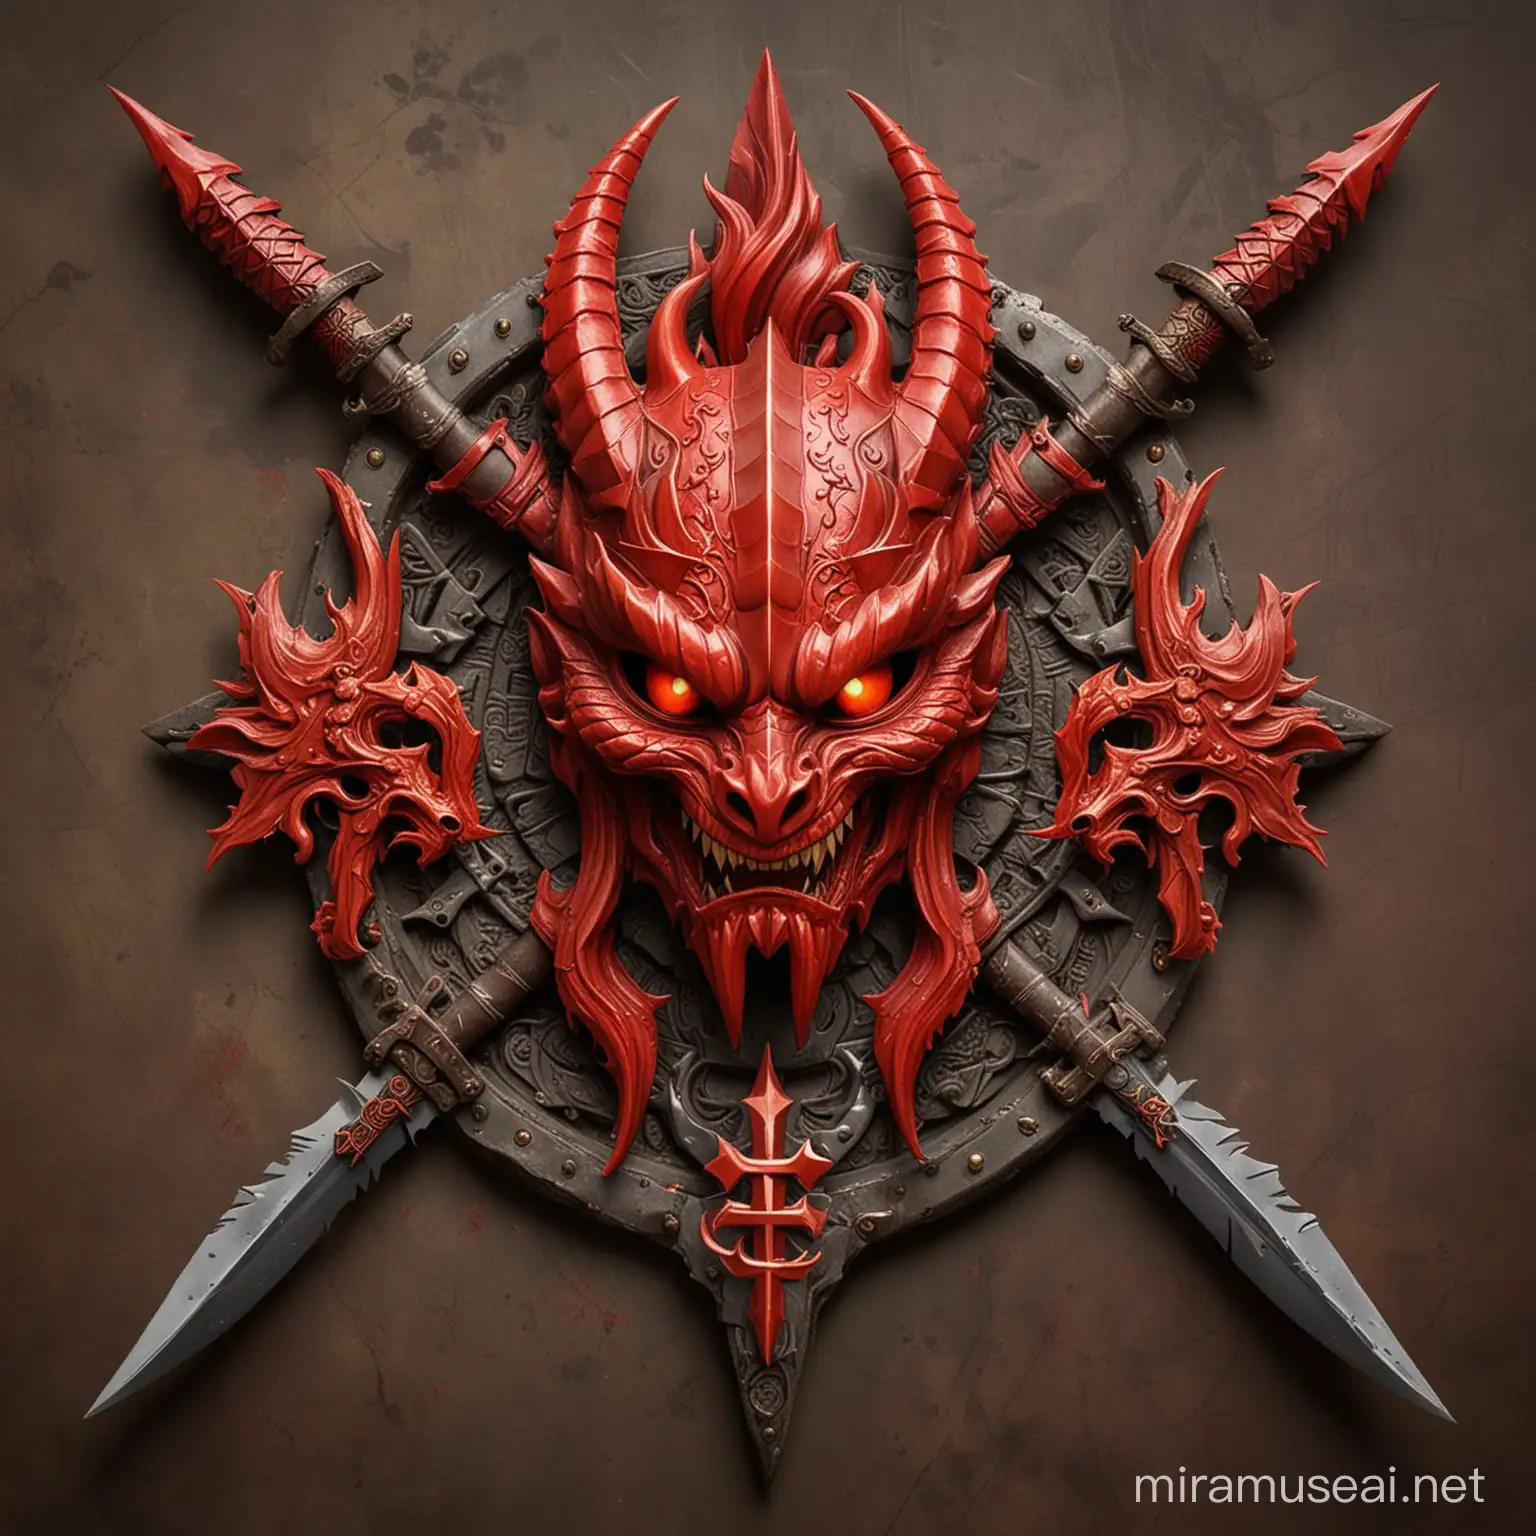 A special forces insignia that you wear on the uniform. A stylish red dragon head in an antique Asian red armour. Two crosses blades in the background. He is surrounded by simplified flames. Red and dark colours. All is simplified, to look like a symbol of special forces in the army.